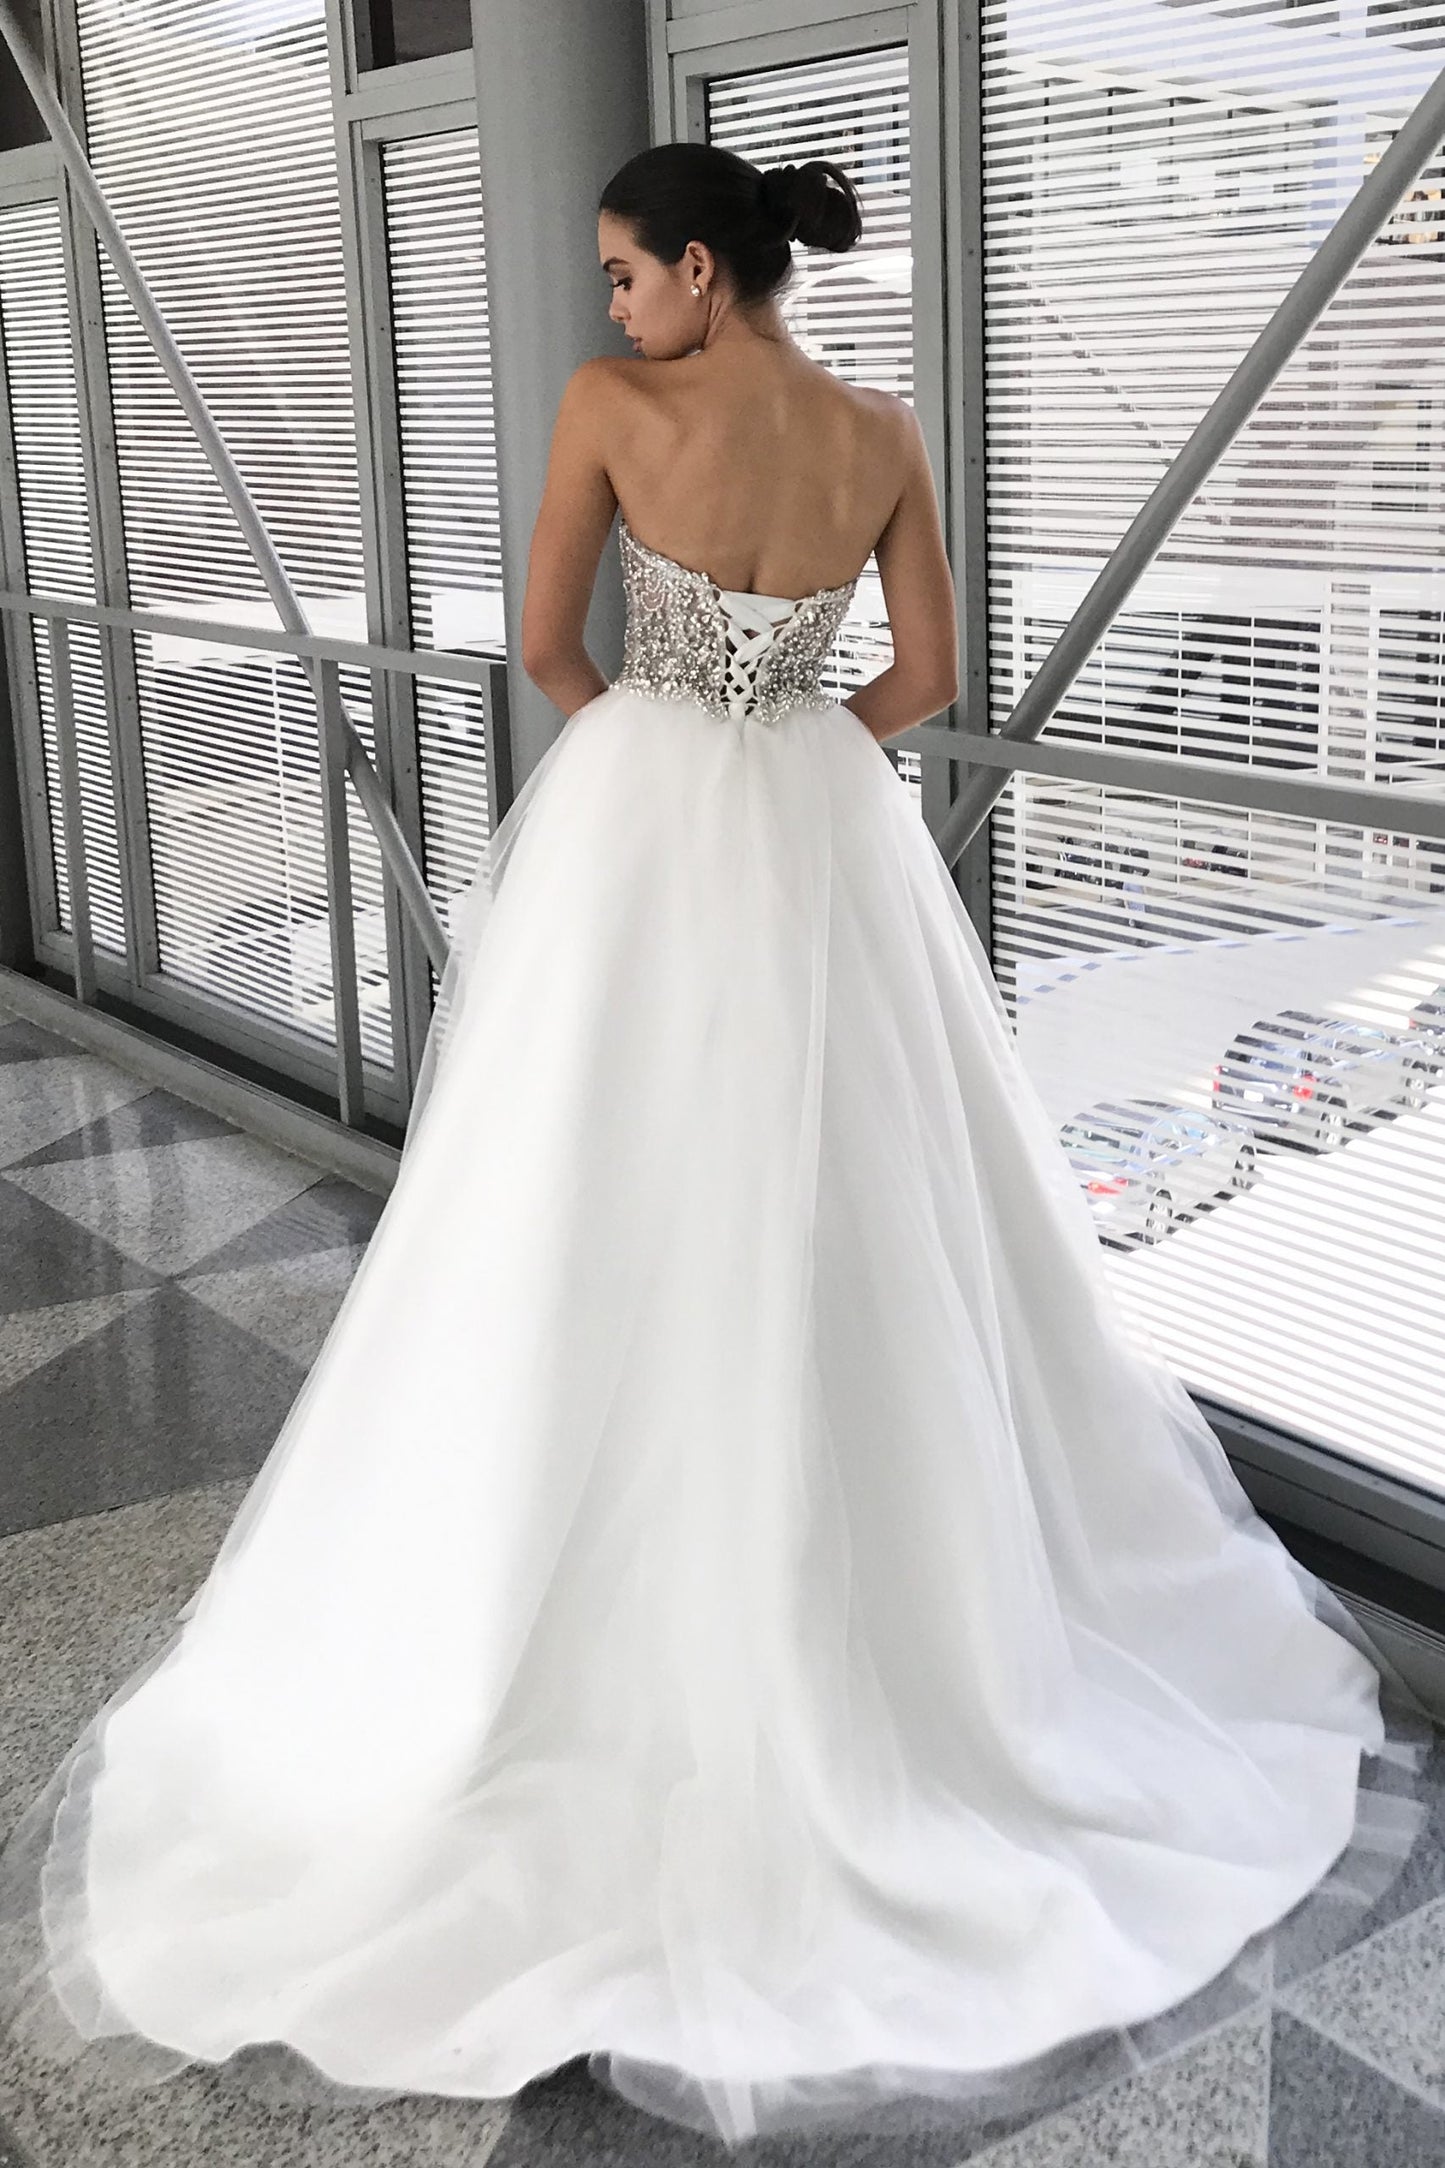 Johnathan Kayne Bridal B200 is a stunning fully crystal embellished Sheer bodice with peak pointes. Lace up corset back closure. A Line Ballgown Wedding Dress & Bridal Gown with a lush Tulle skirt. Jaw Dropping Glam Bridal Style!  Available Sizes: 00,0,2,4,6,8,10,12,14,16  Available Colors: Ivory